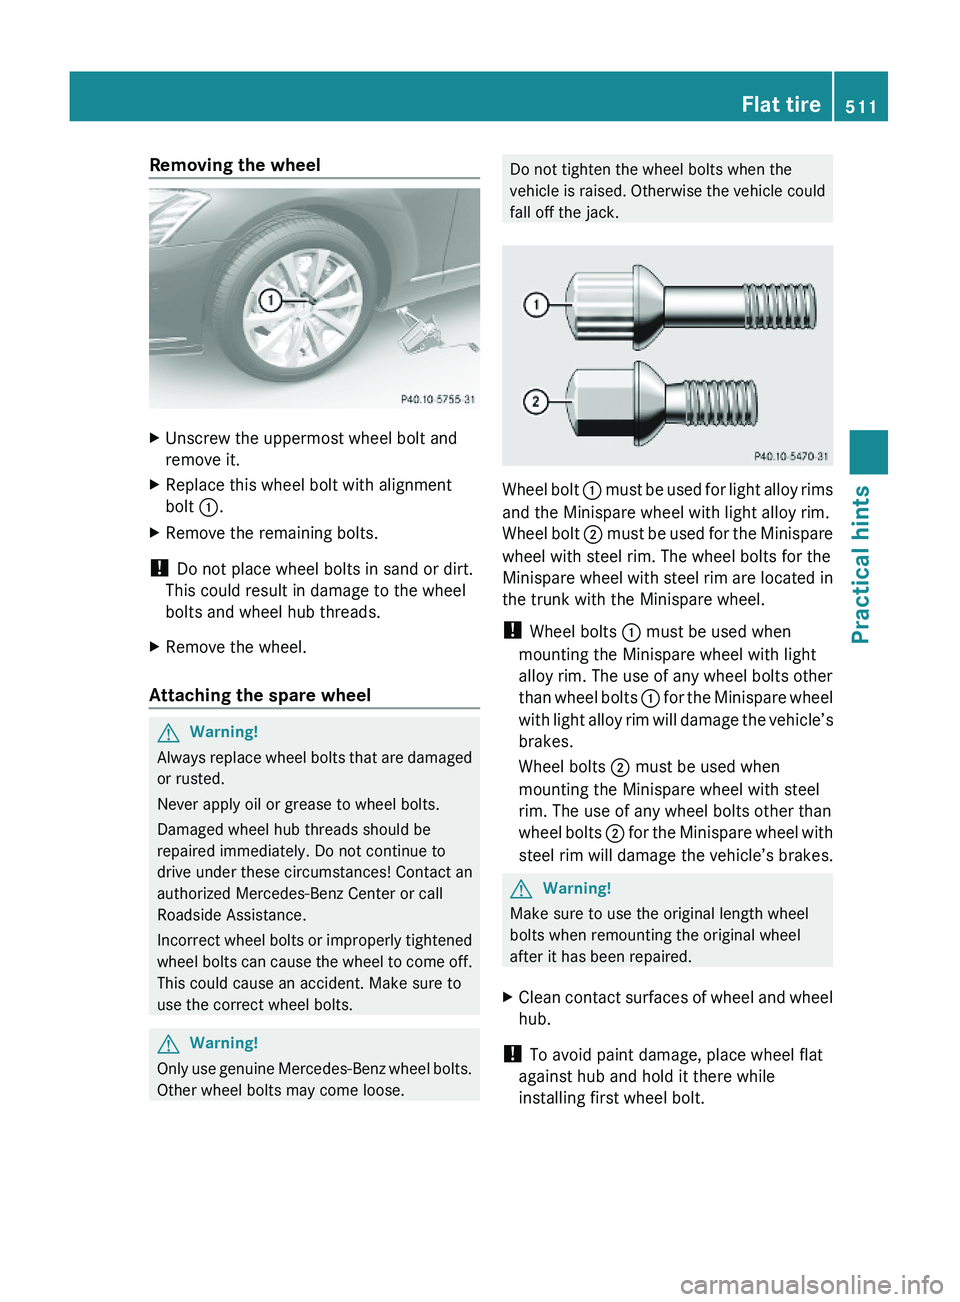 MERCEDES-BENZ S CLASS 2010  Owners Manual Removing the wheelXUnscrew the uppermost wheel bolt and
remove it.
XReplace this wheel bolt with alignment
bolt \000F.
XRemove the remaining bolts.
! Do not place wheel bolts in sand or dirt.
This cou